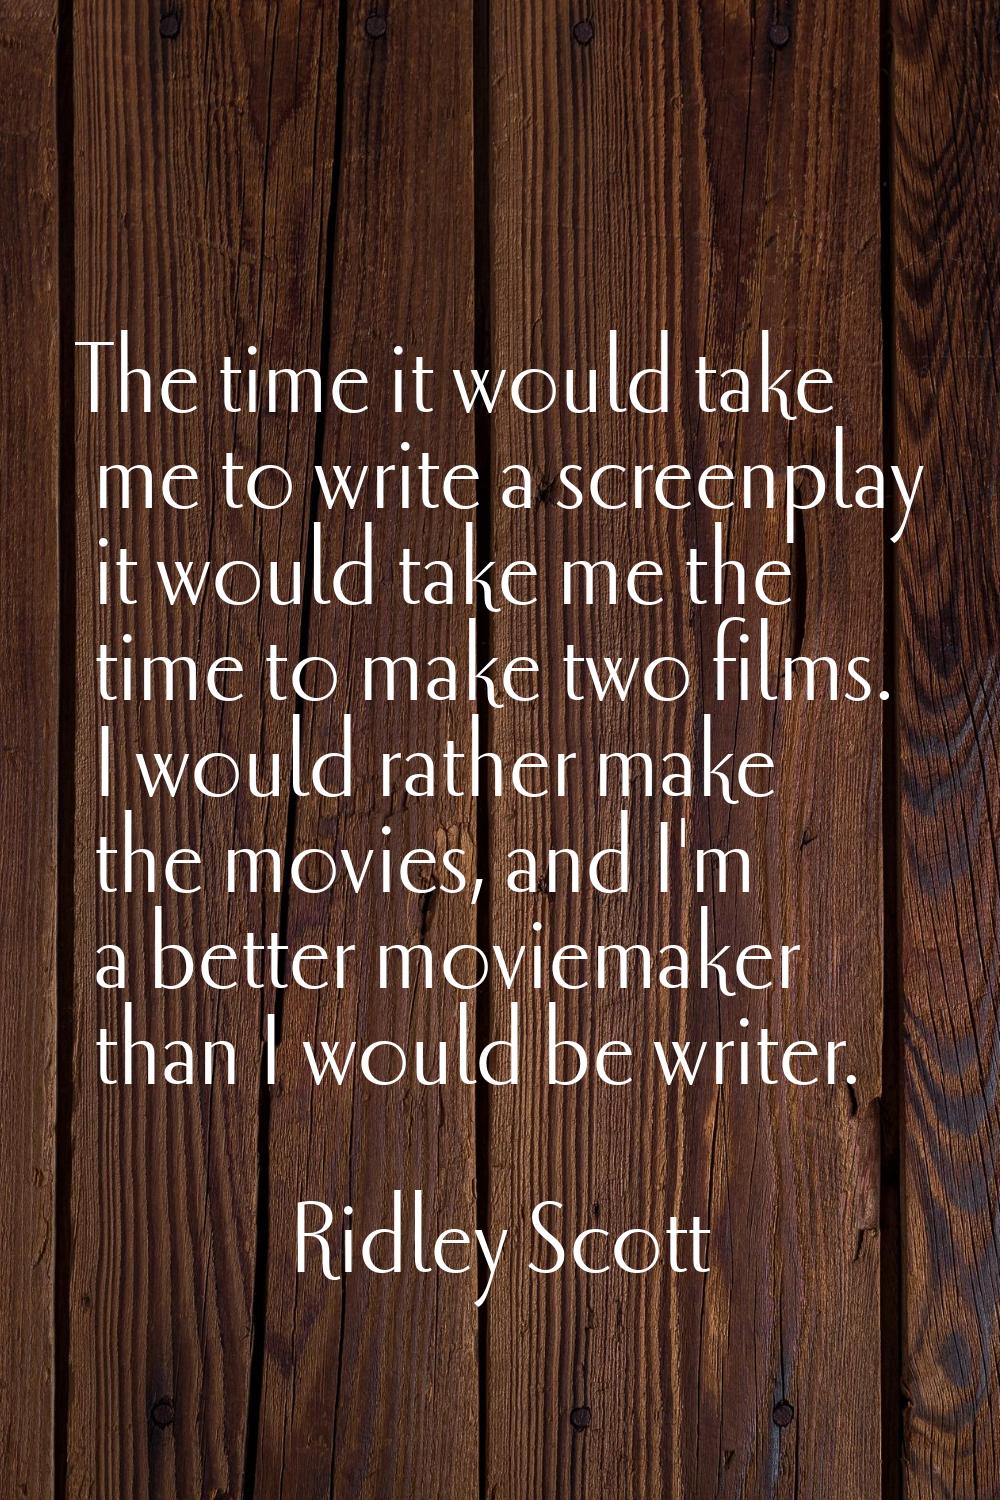 The time it would take me to write a screenplay it would take me the time to make two films. I woul